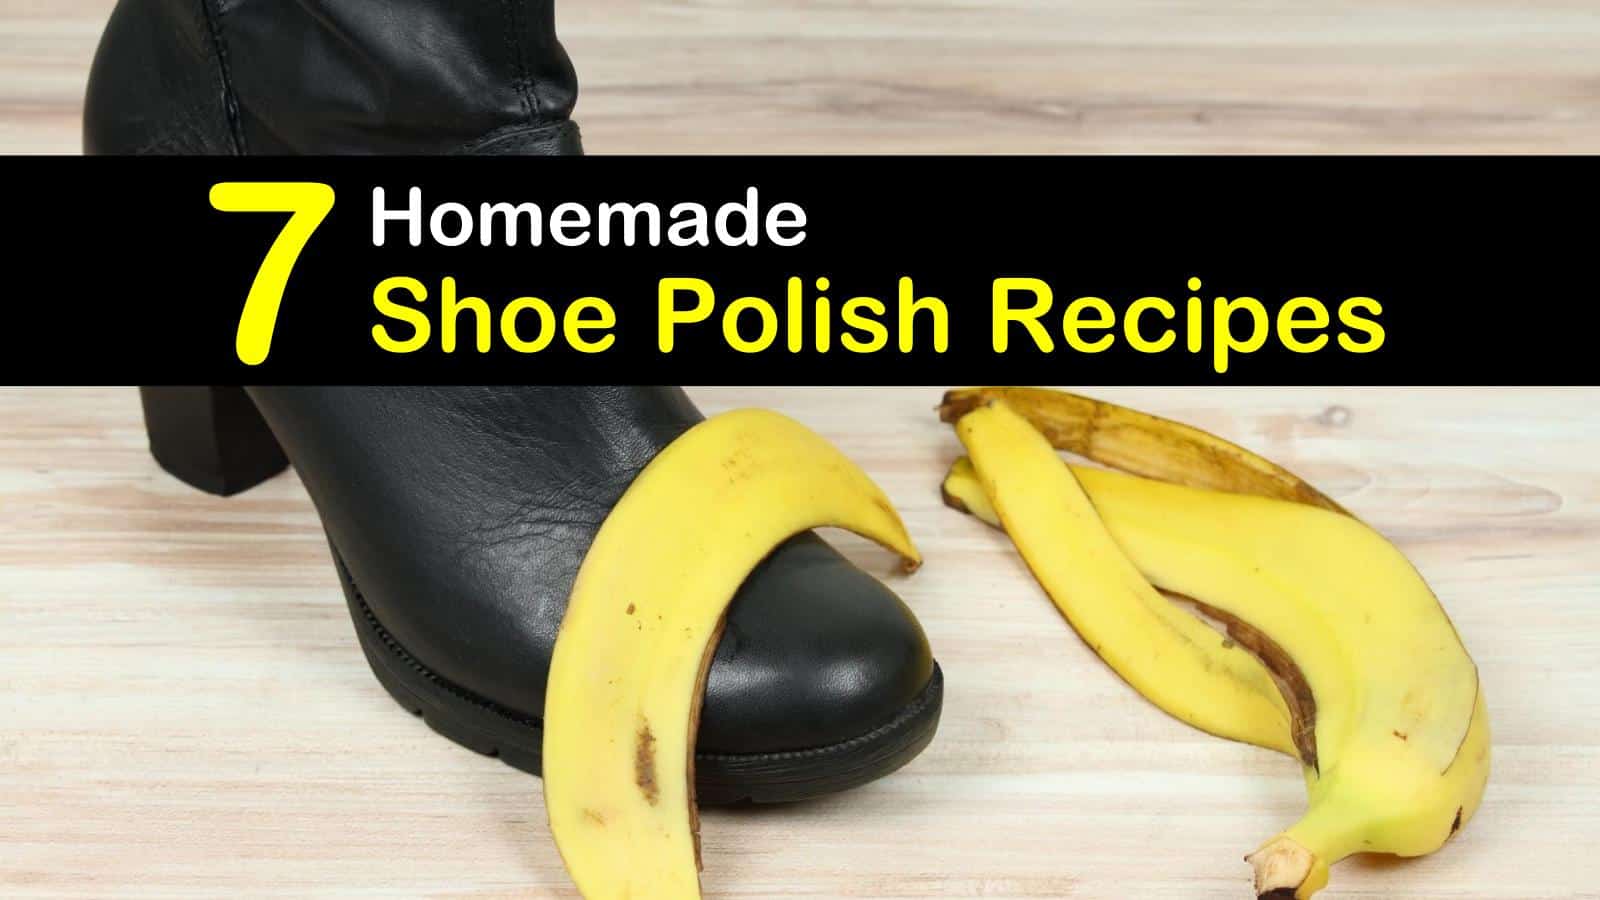 coconut oil to shine shoes